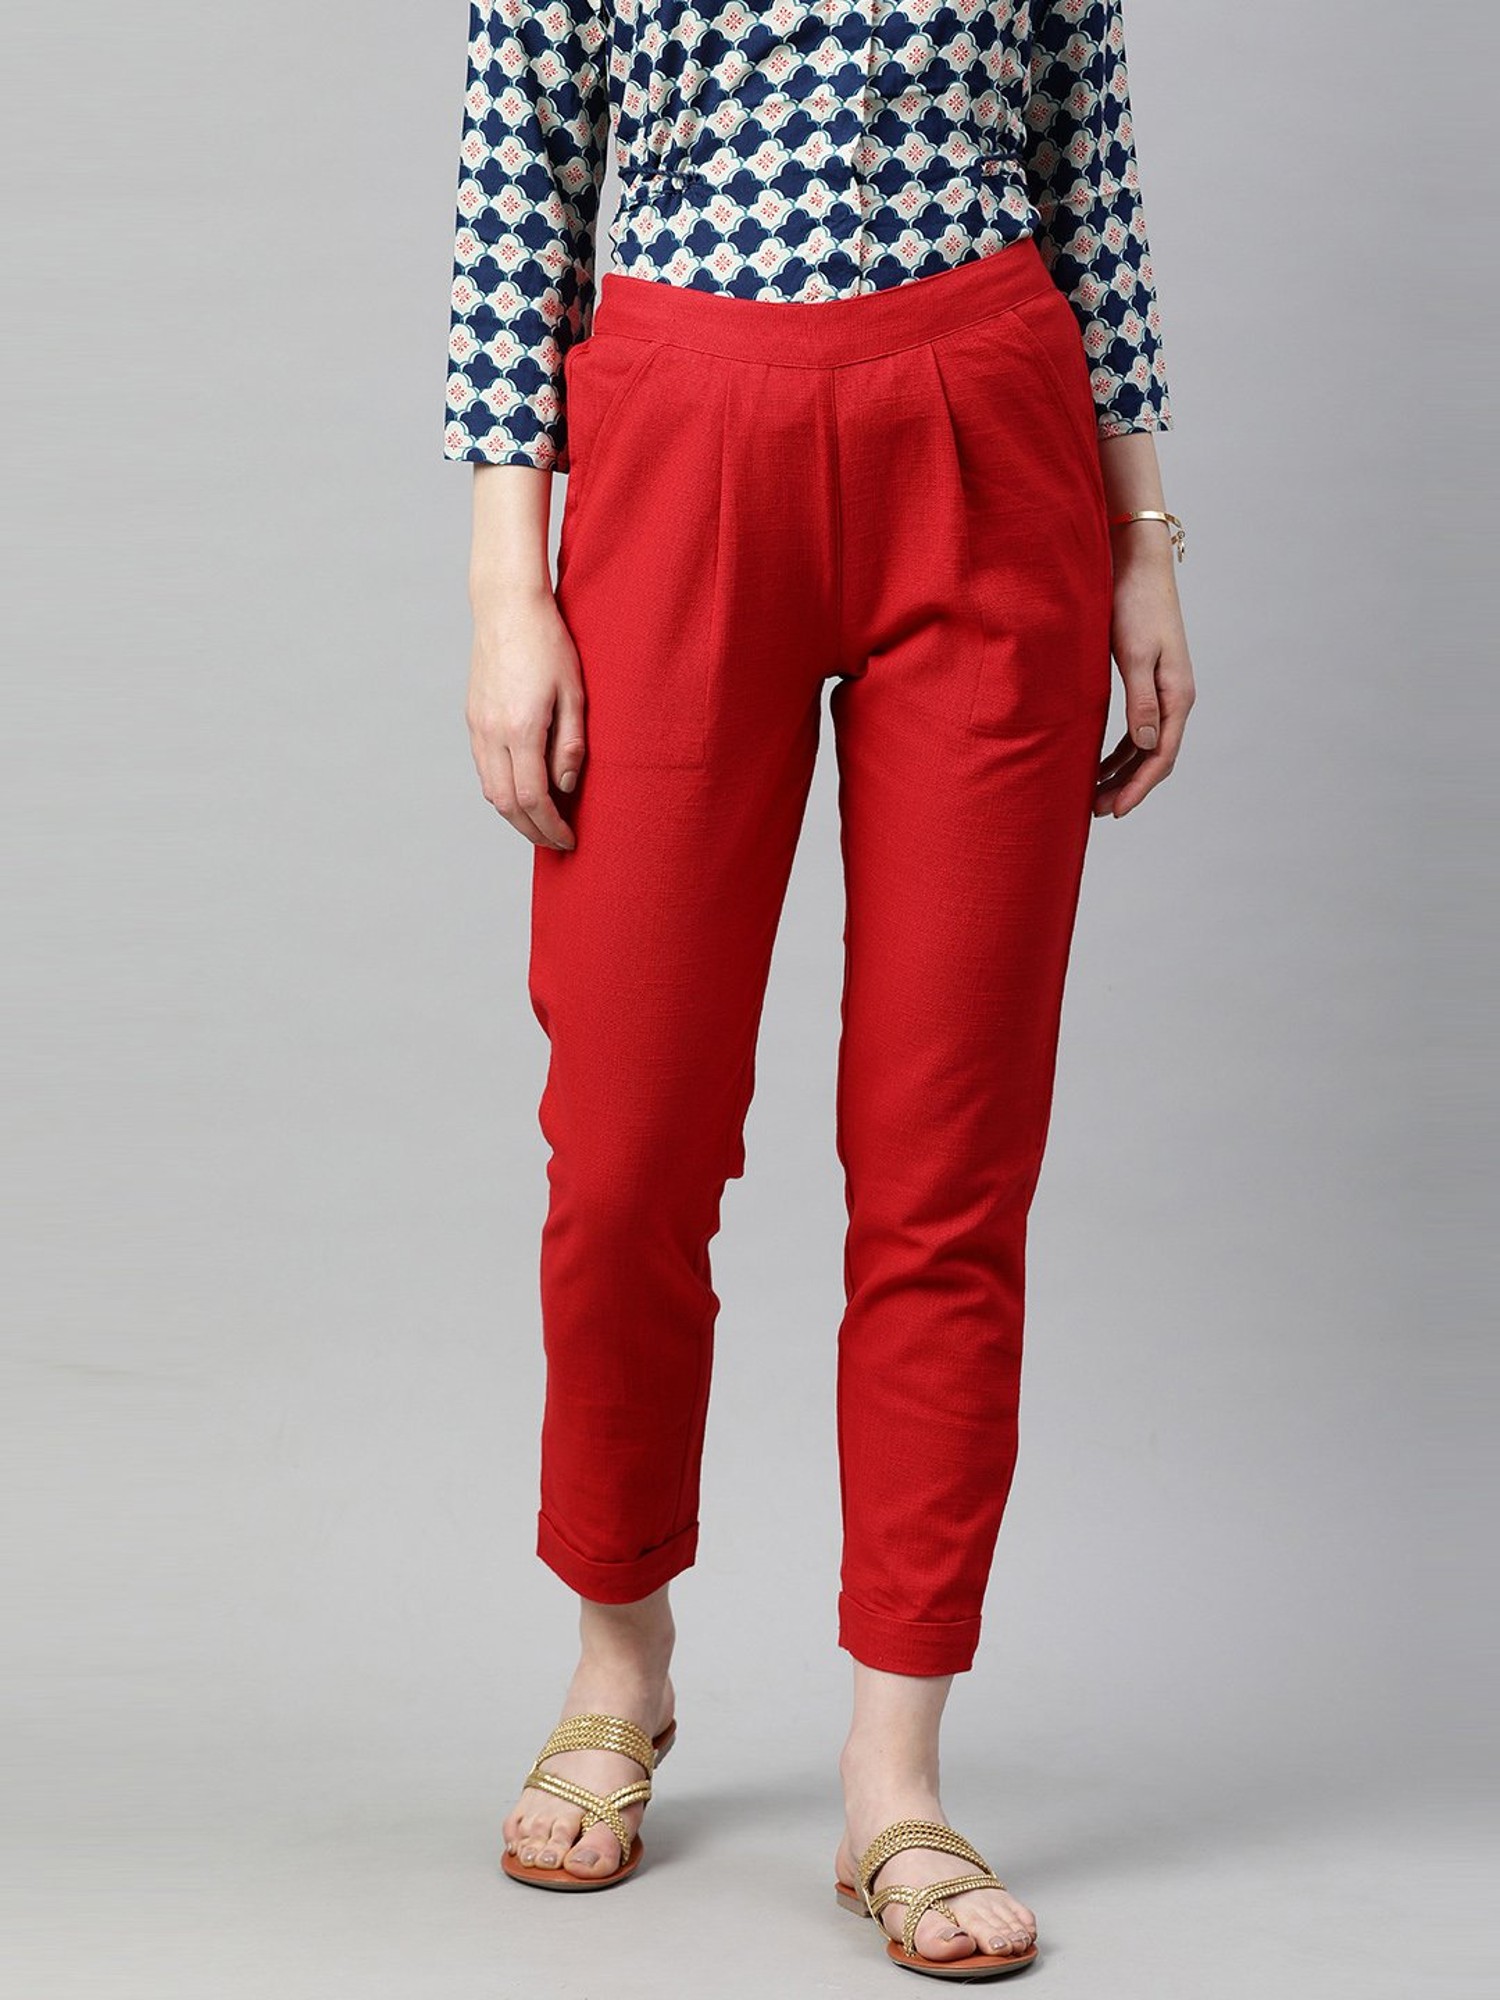 Buy JUNIPER Red Women's Red Cotton Solid Straight Pants With Side Pocket |  Shoppers Stop